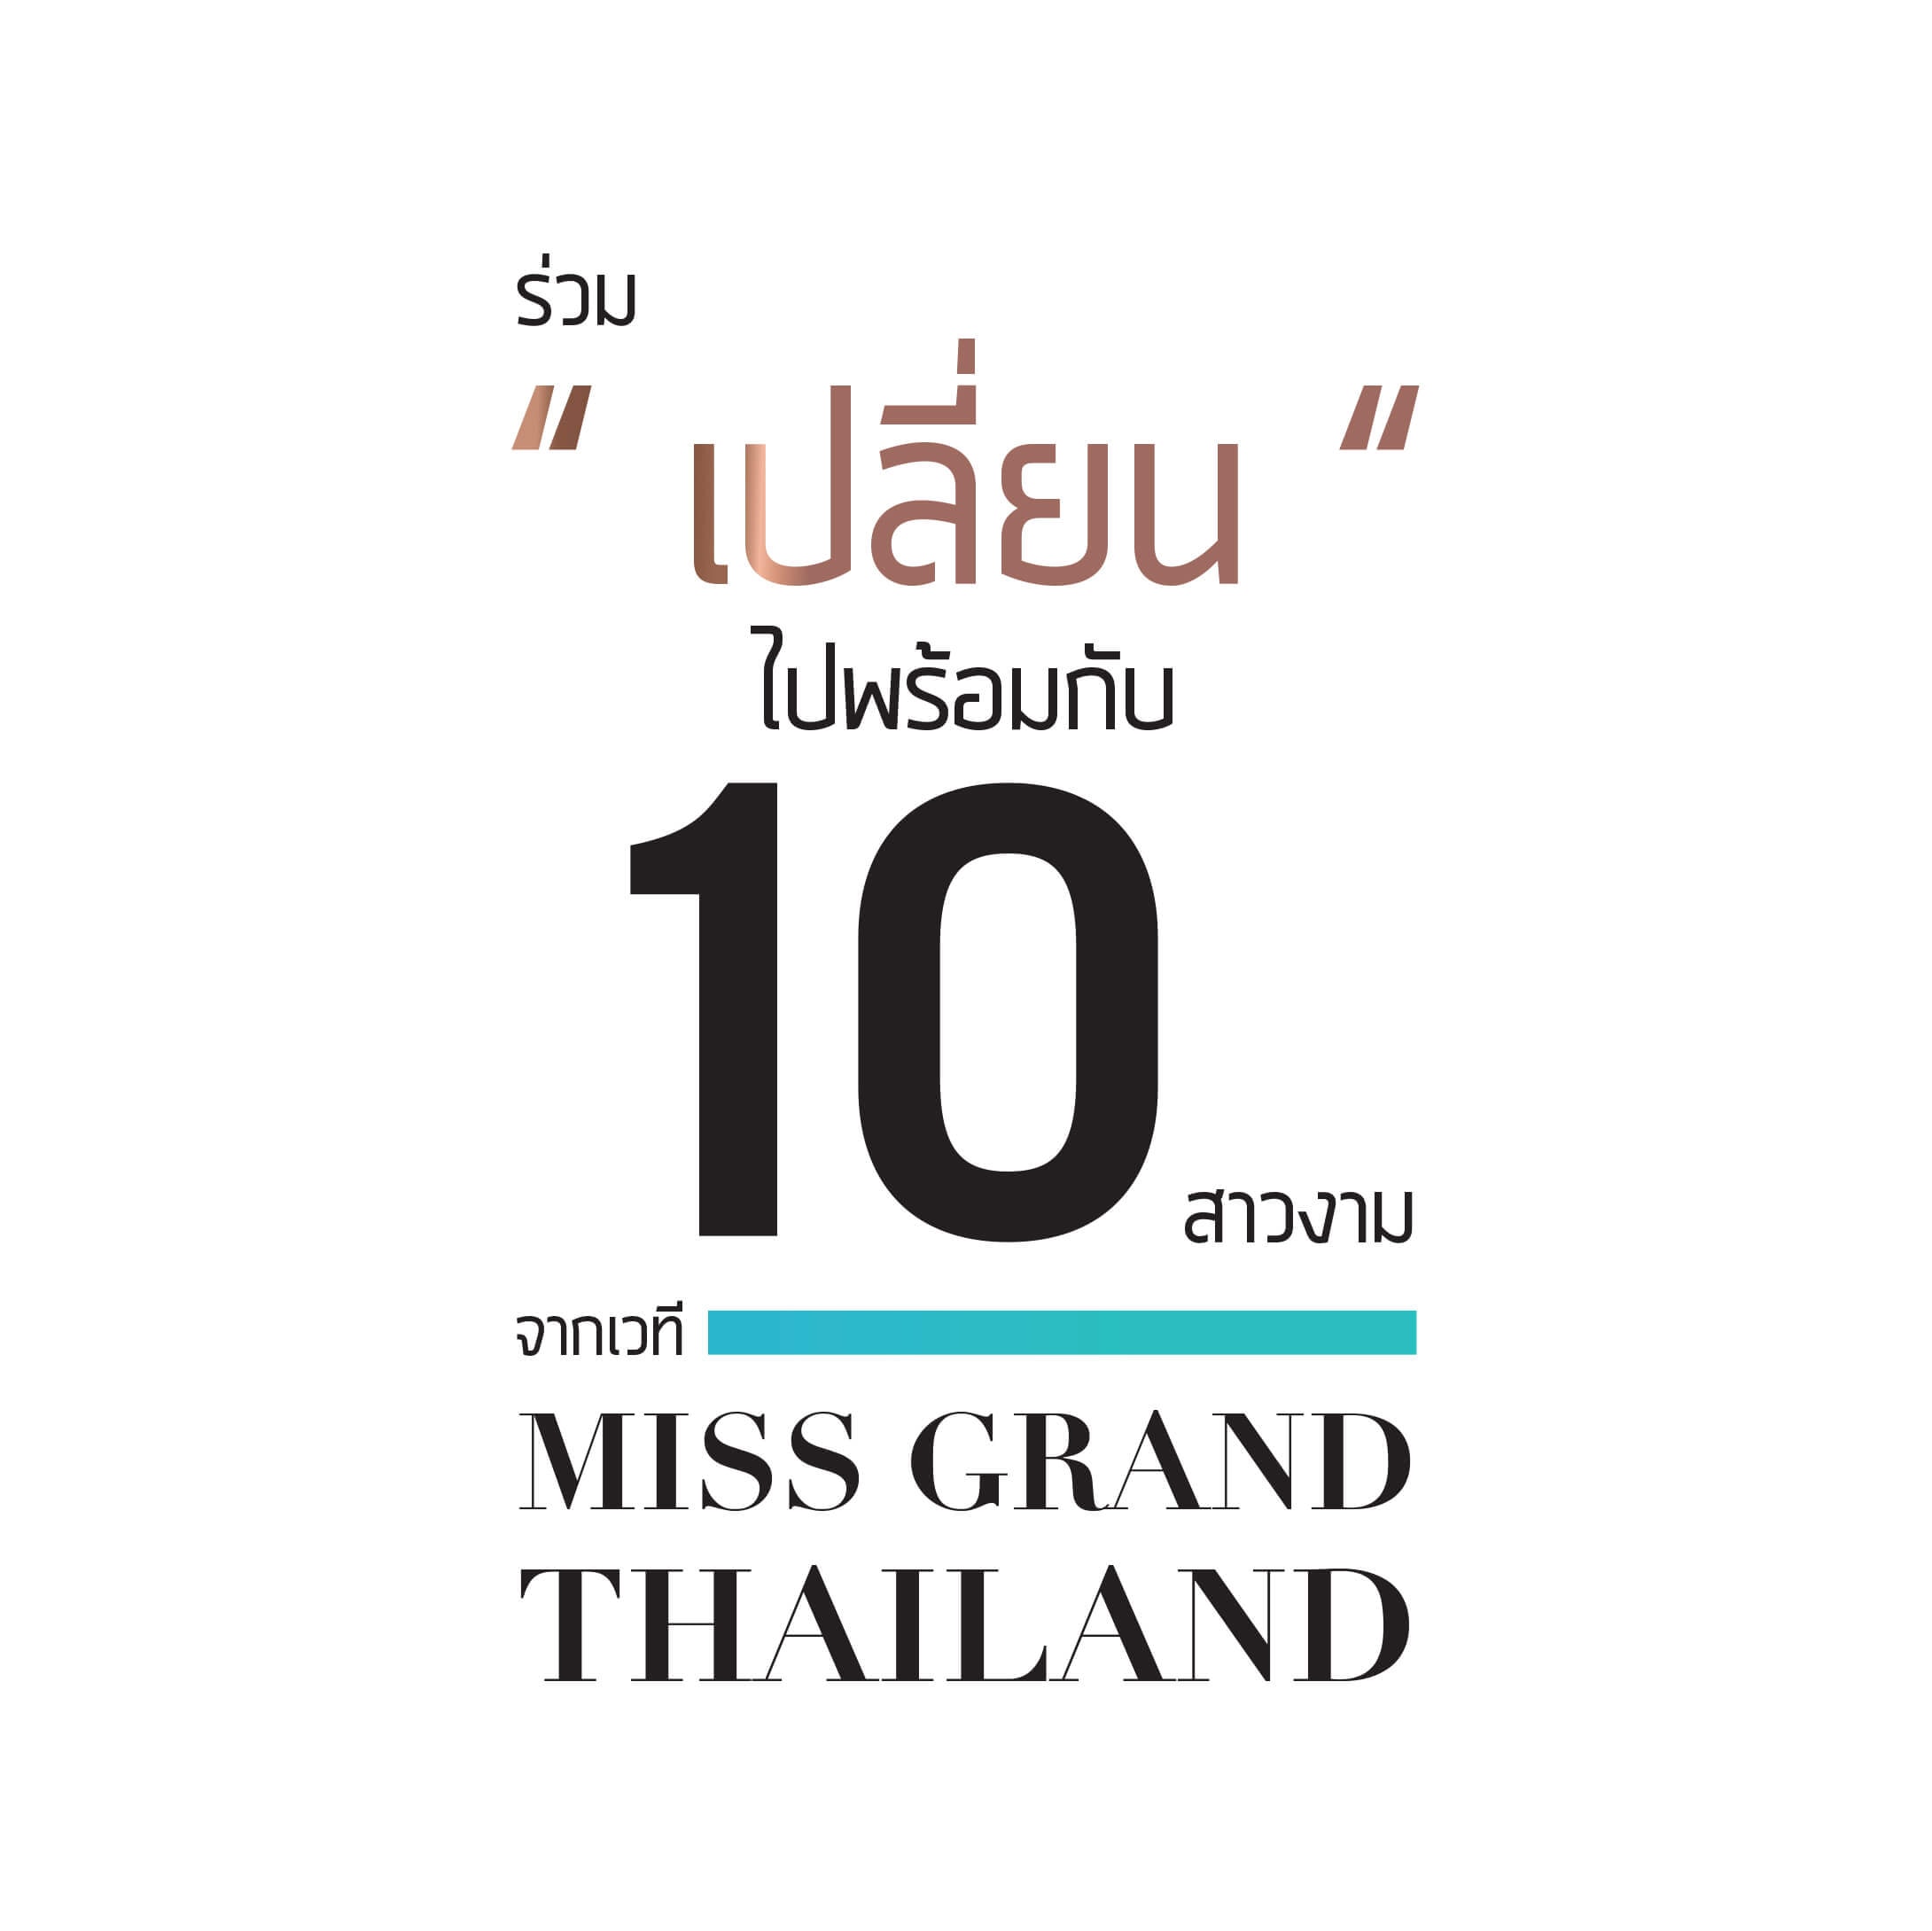 MissGrandThailand2016, ‎PongsakMGT, ‎PongsakChange, ‎PongsakClinic, ‎From now on, every area has only Grand.